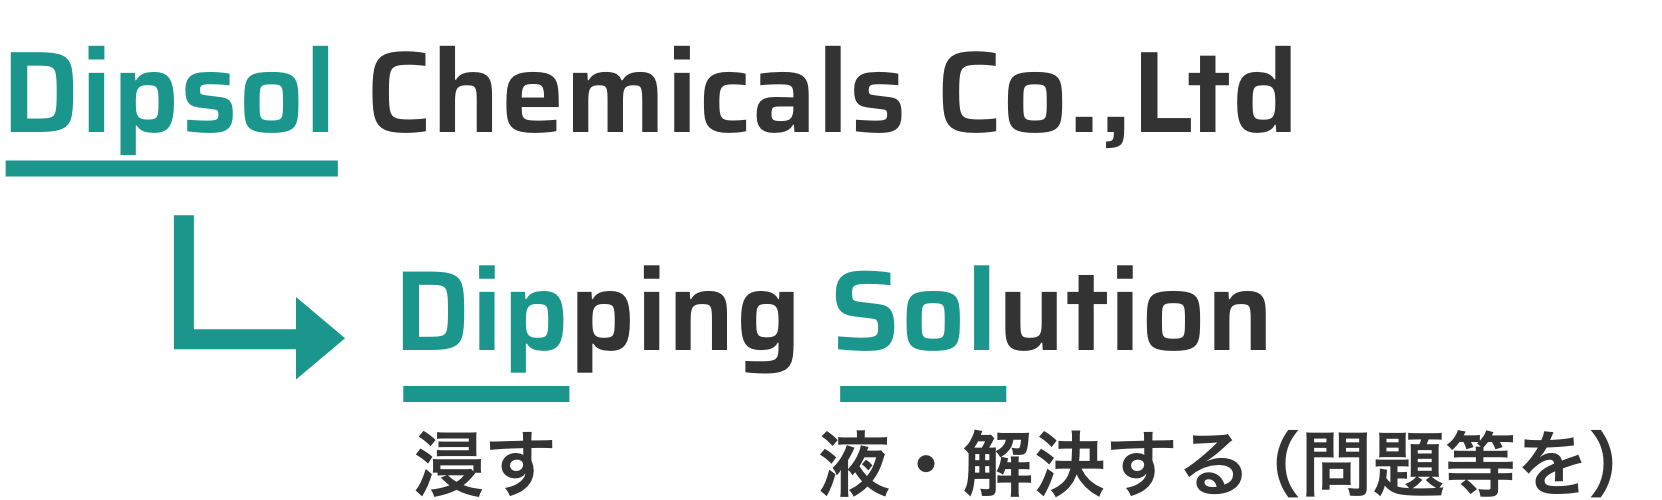 Dipsol Chemicals Co.,Ltd=Dipping Solution